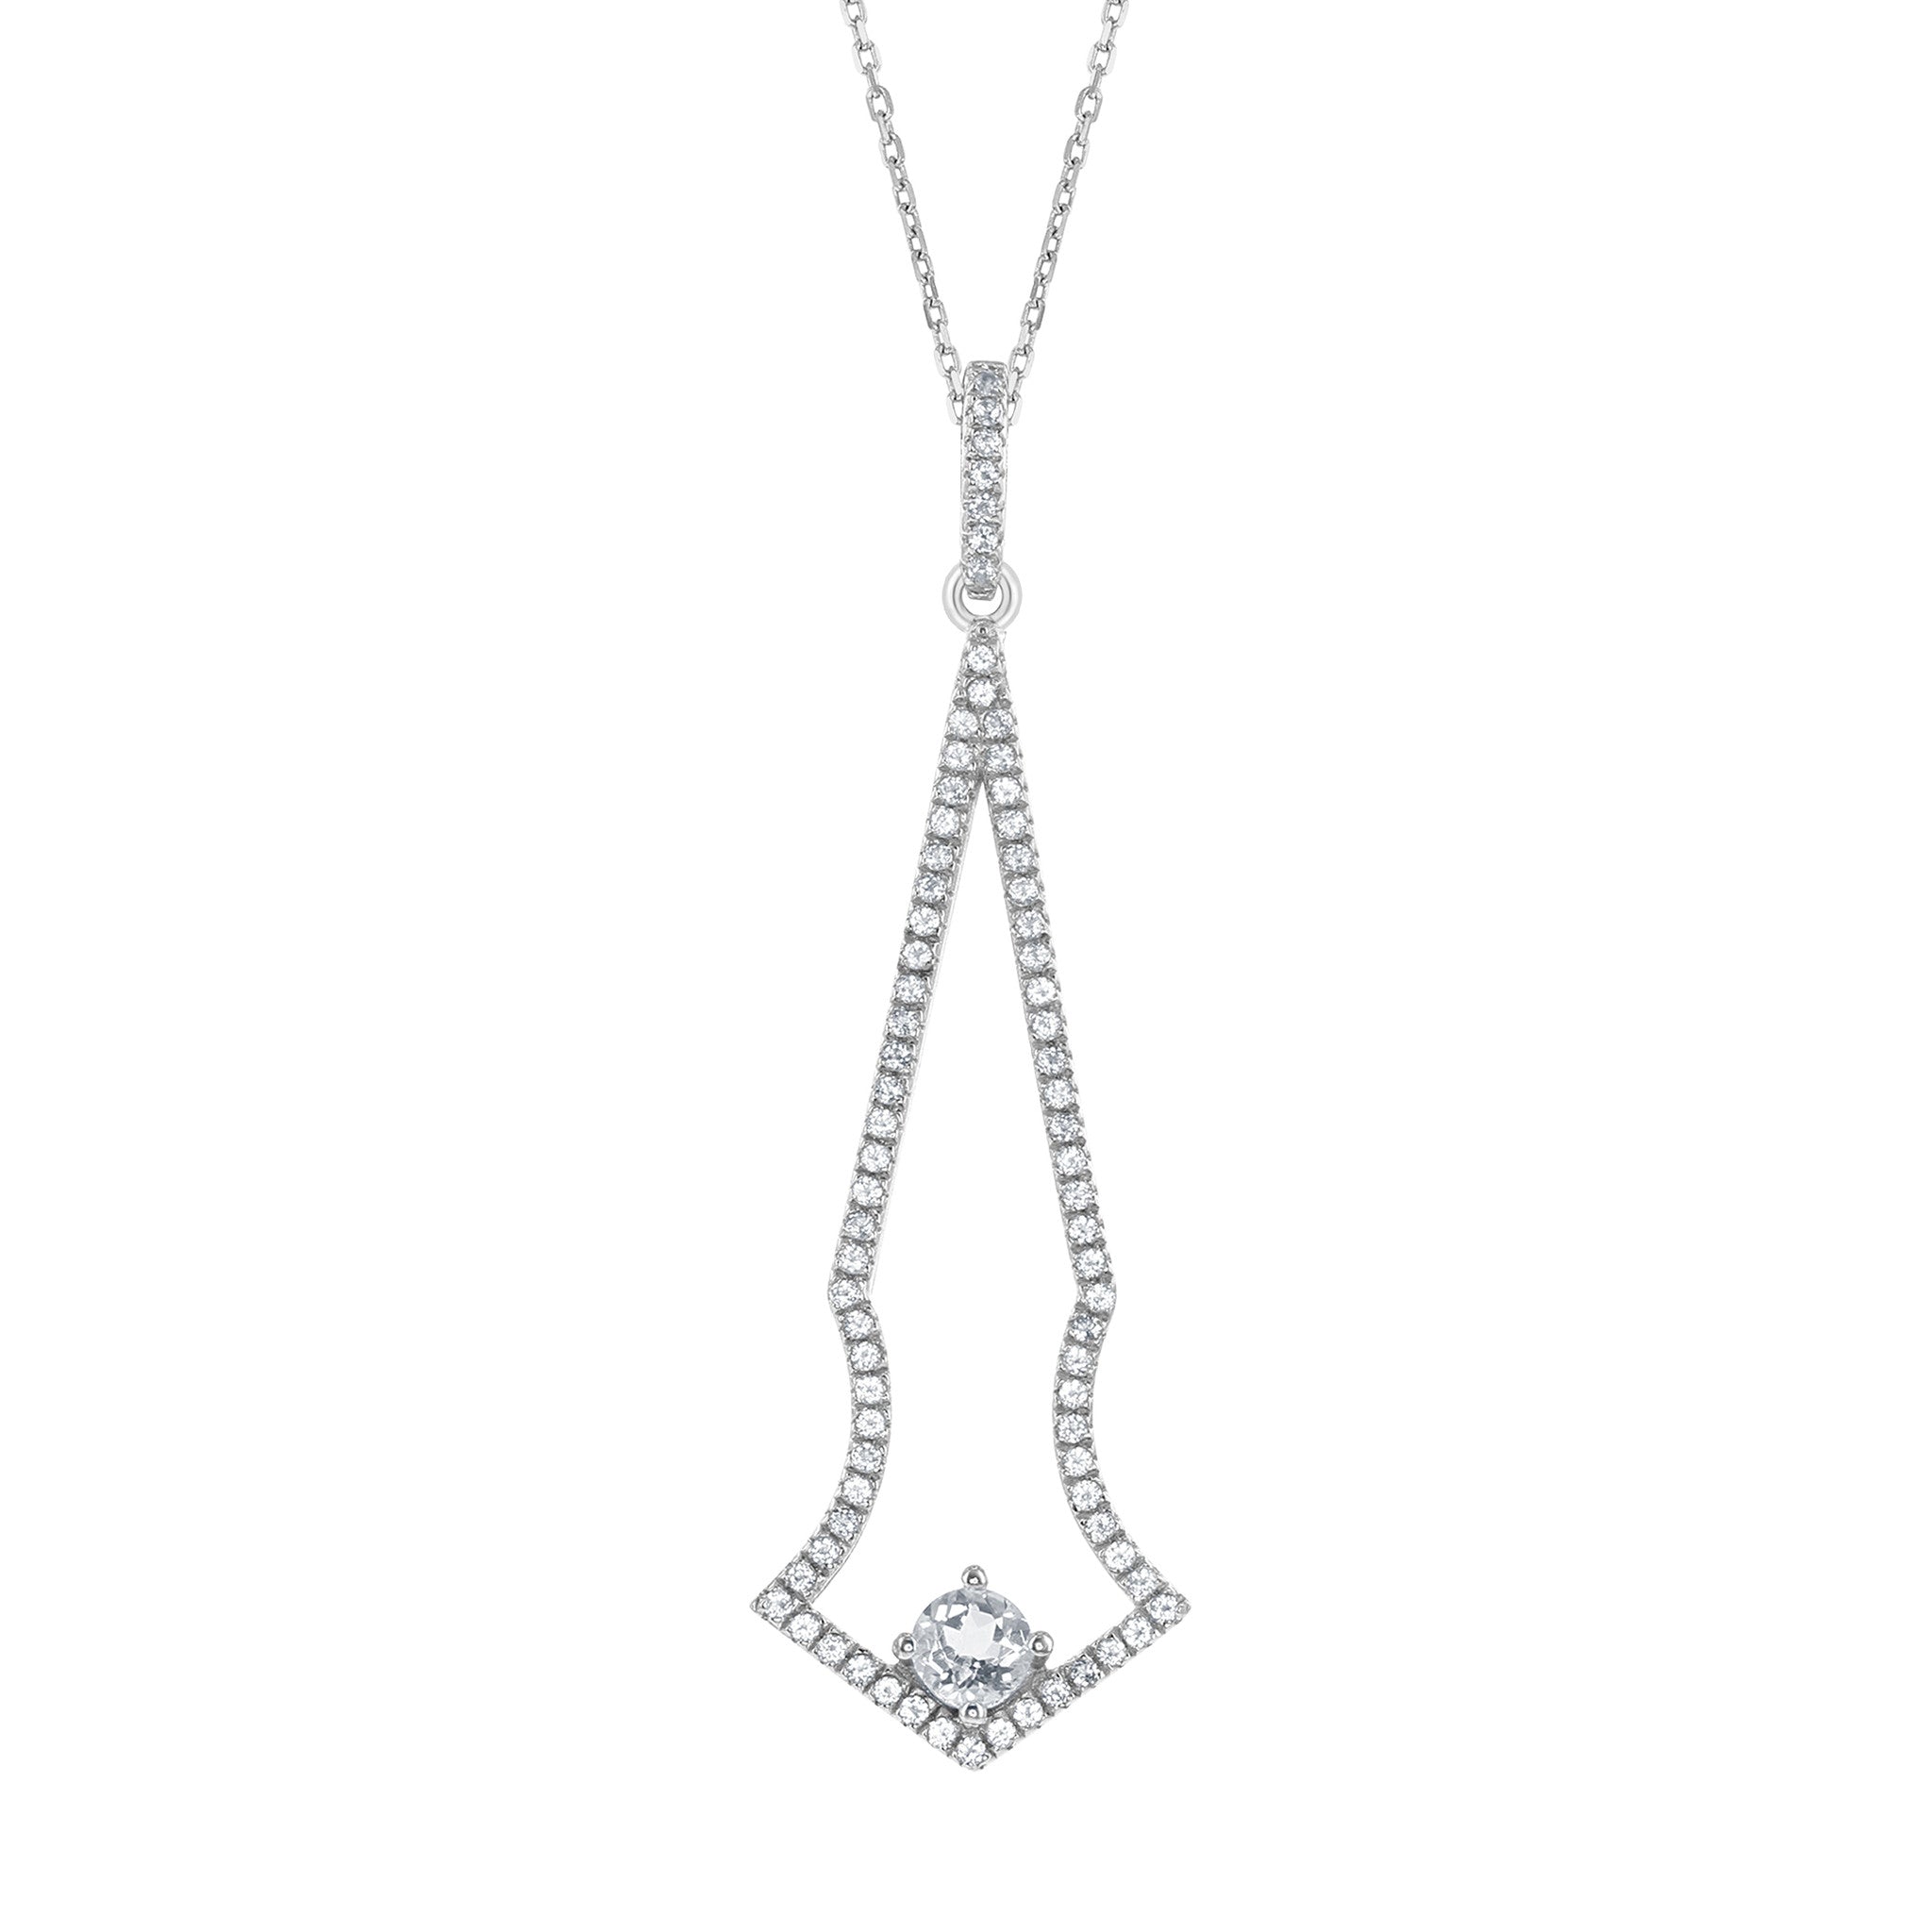 Bellissima Bridal White Topaz and Sterling Silver Necklace 